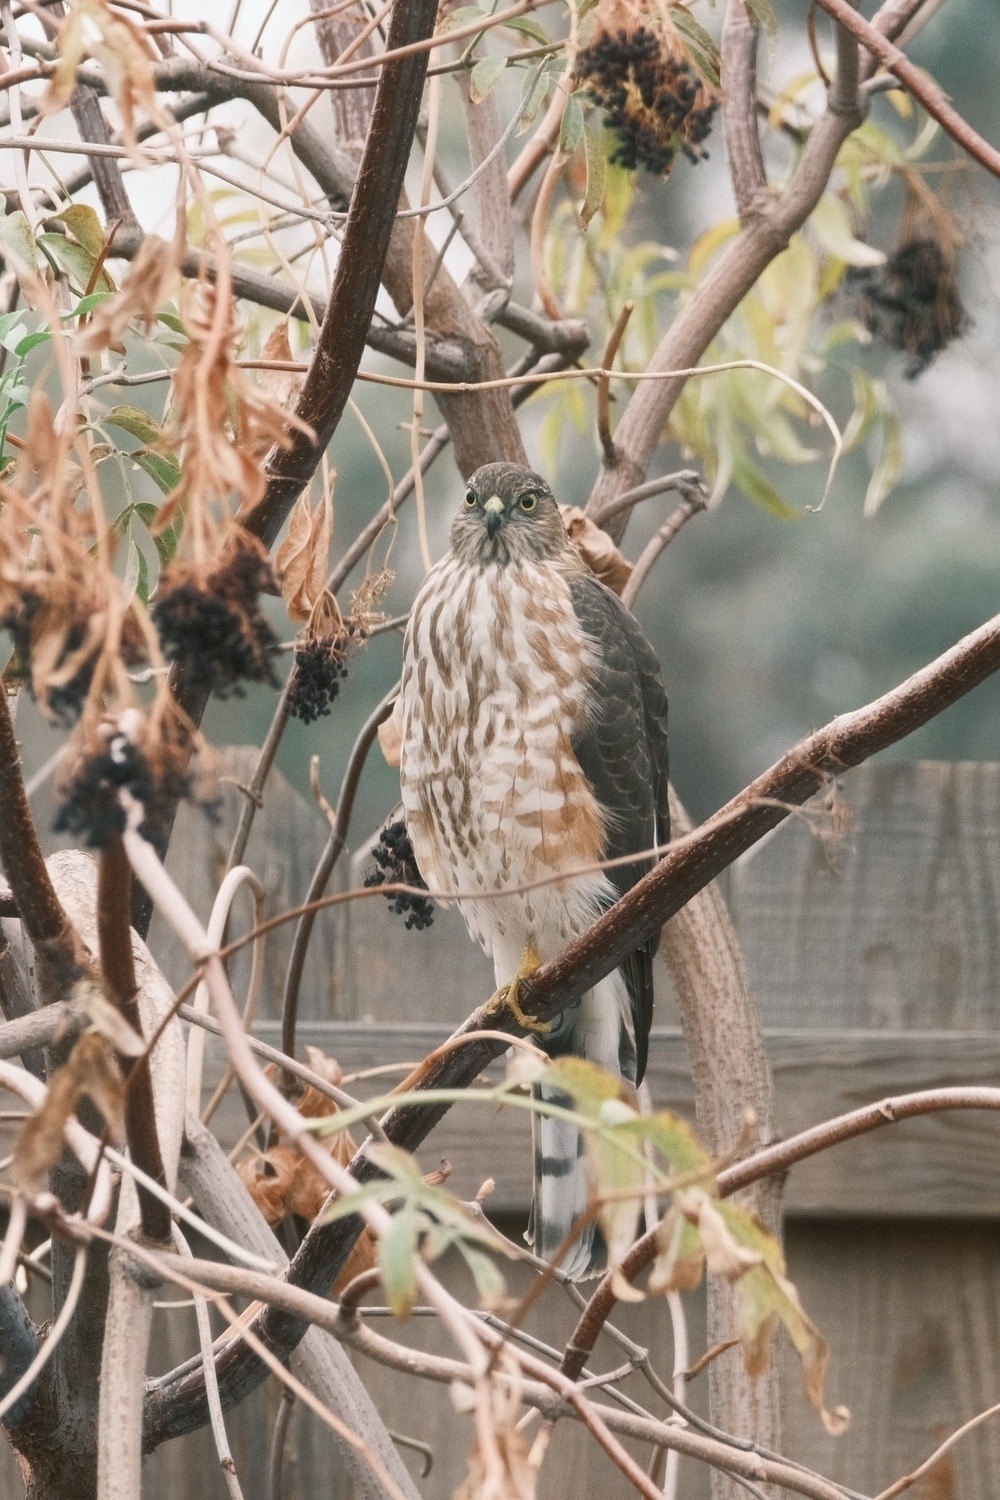 A hawk perched in an elderberry bush. It has rust red bars on its white chest and a dark brown back. Both its yellowish eyes are looking forward toward something off to the photographer’s side.